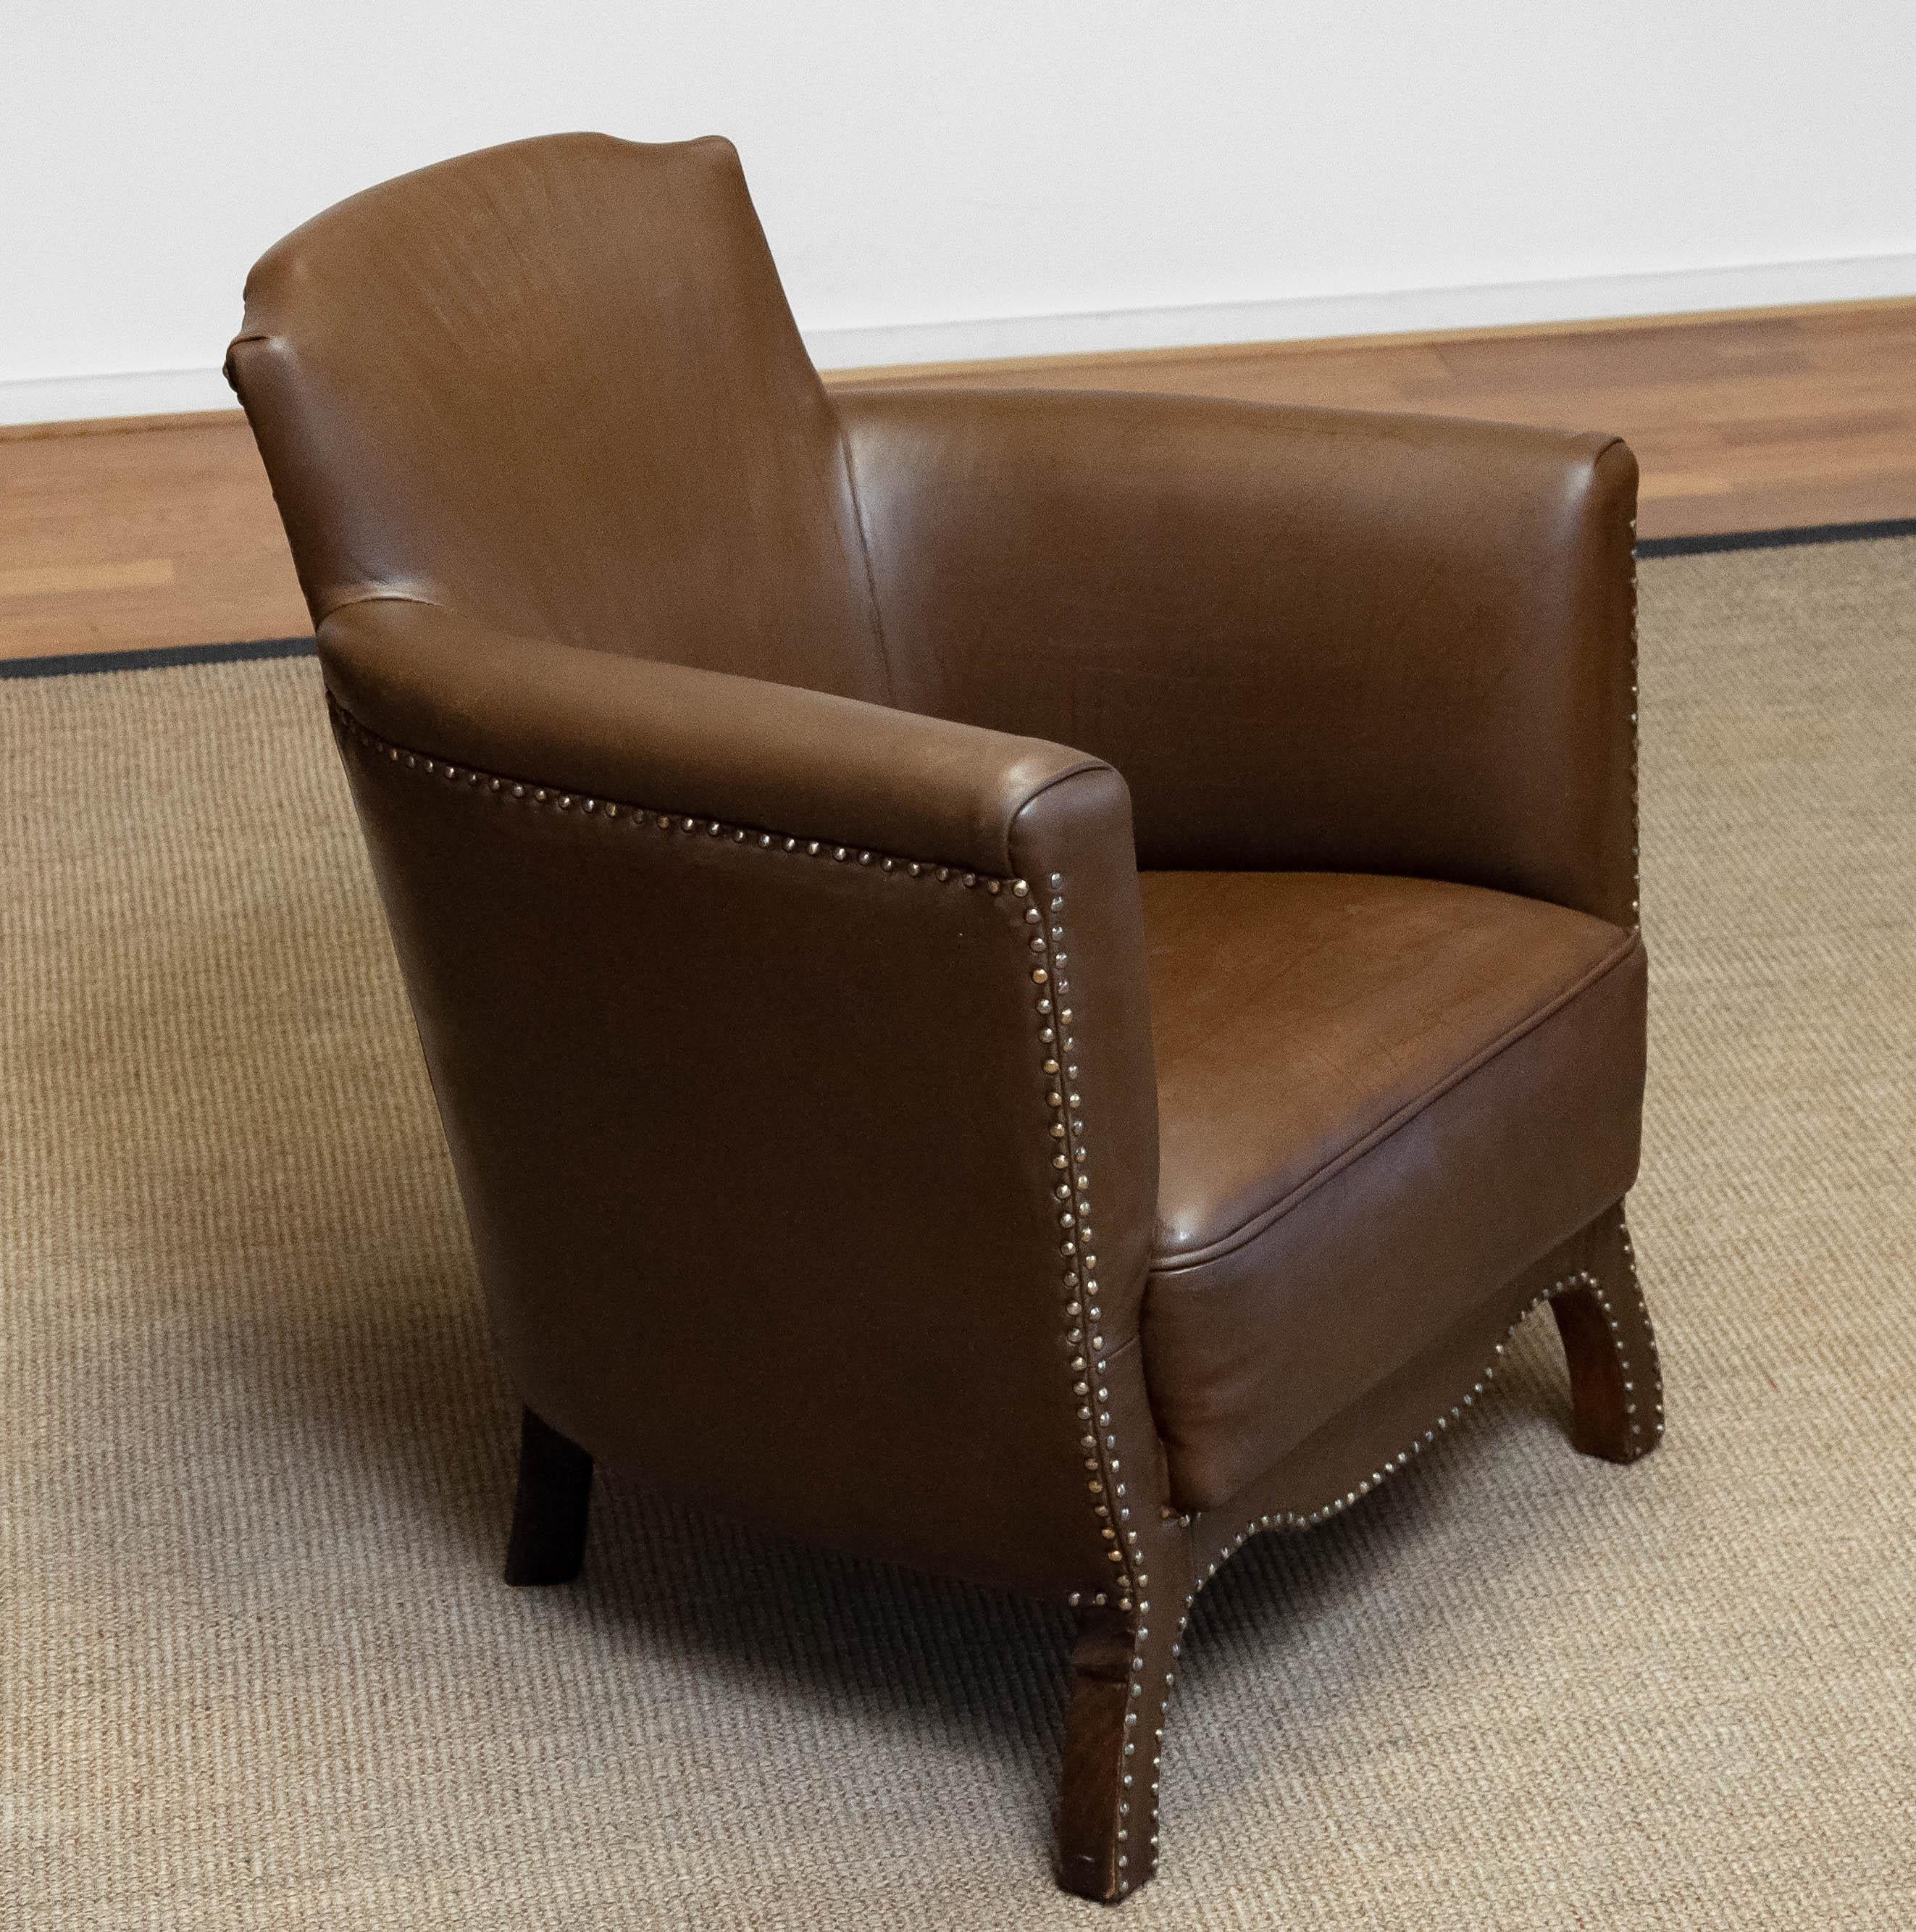 1930s Swedish Tan / Brown Nailed Leather Lounge Chair By Otto Schultz For Boet For Sale 4